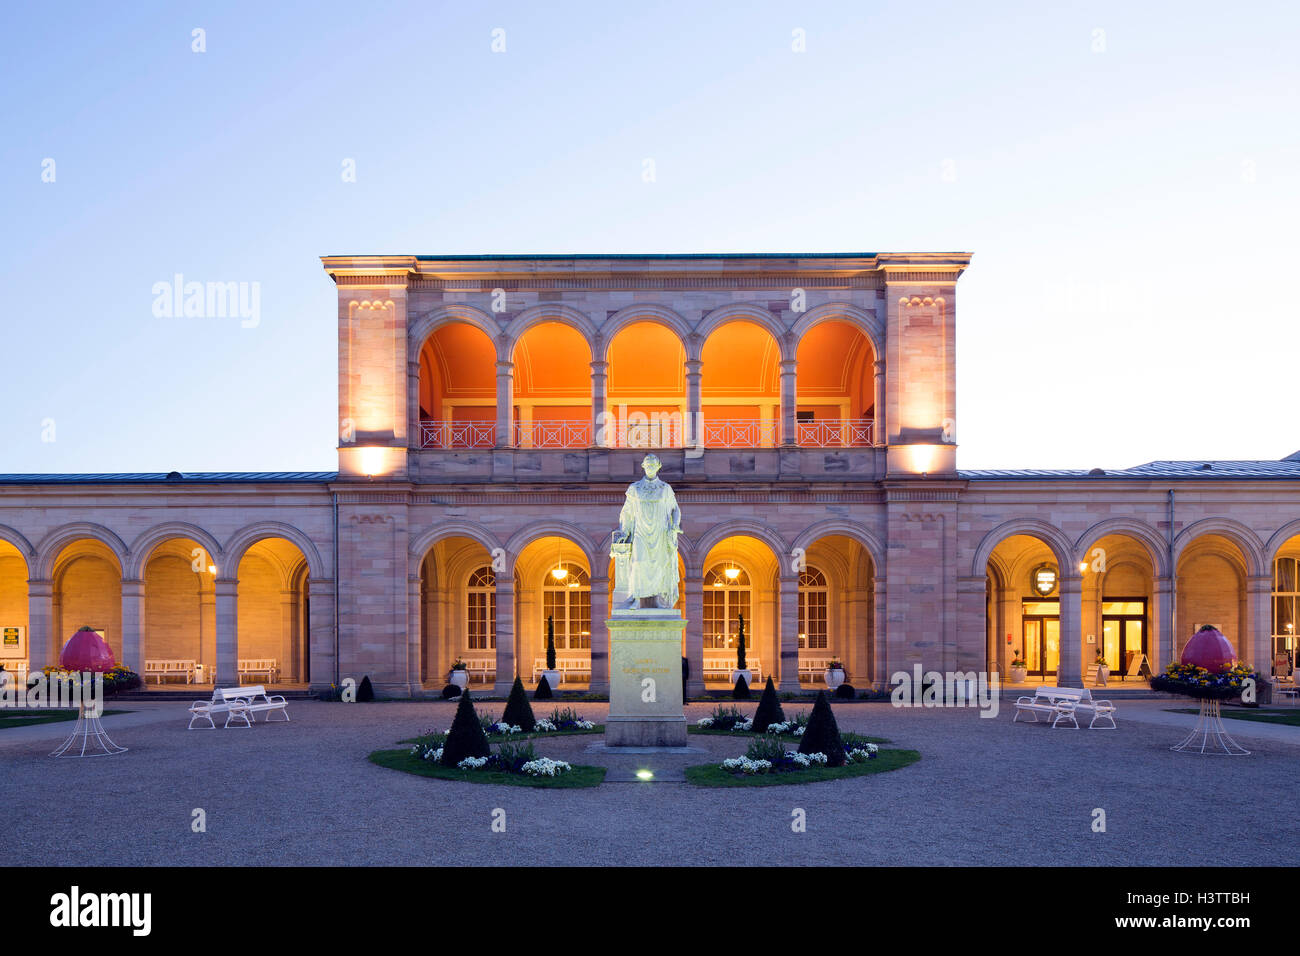 Lighted Arcade building at dusk, with Rossini-hall and arcade passage, Monument Ludwig I., spa garden Stock Photo